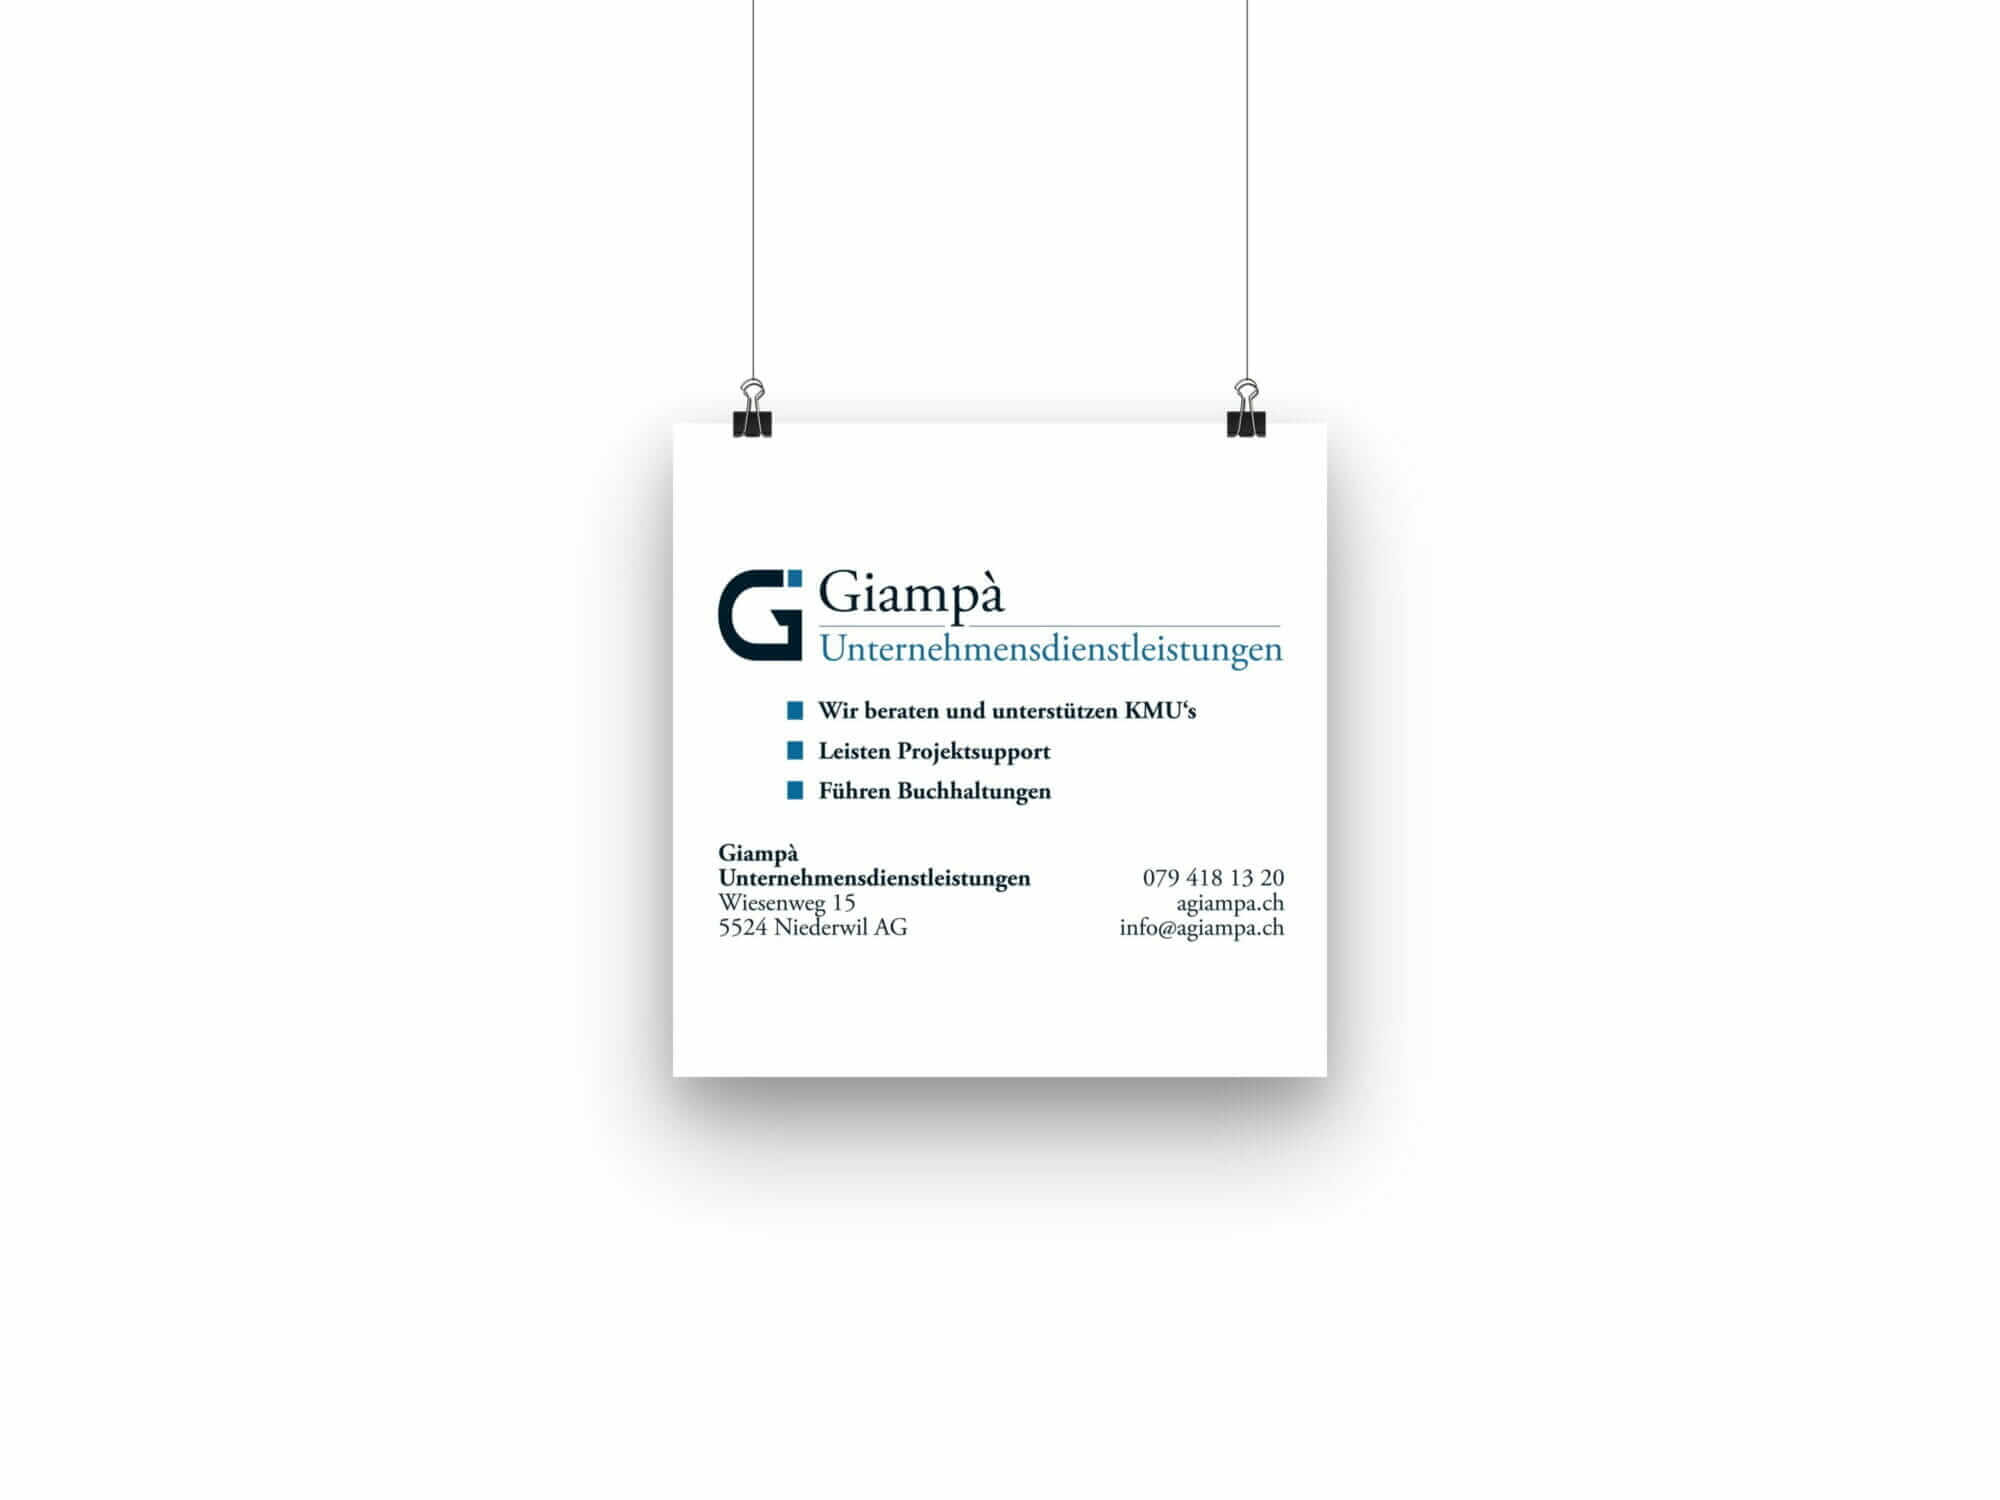 plakat giampa quer scaled